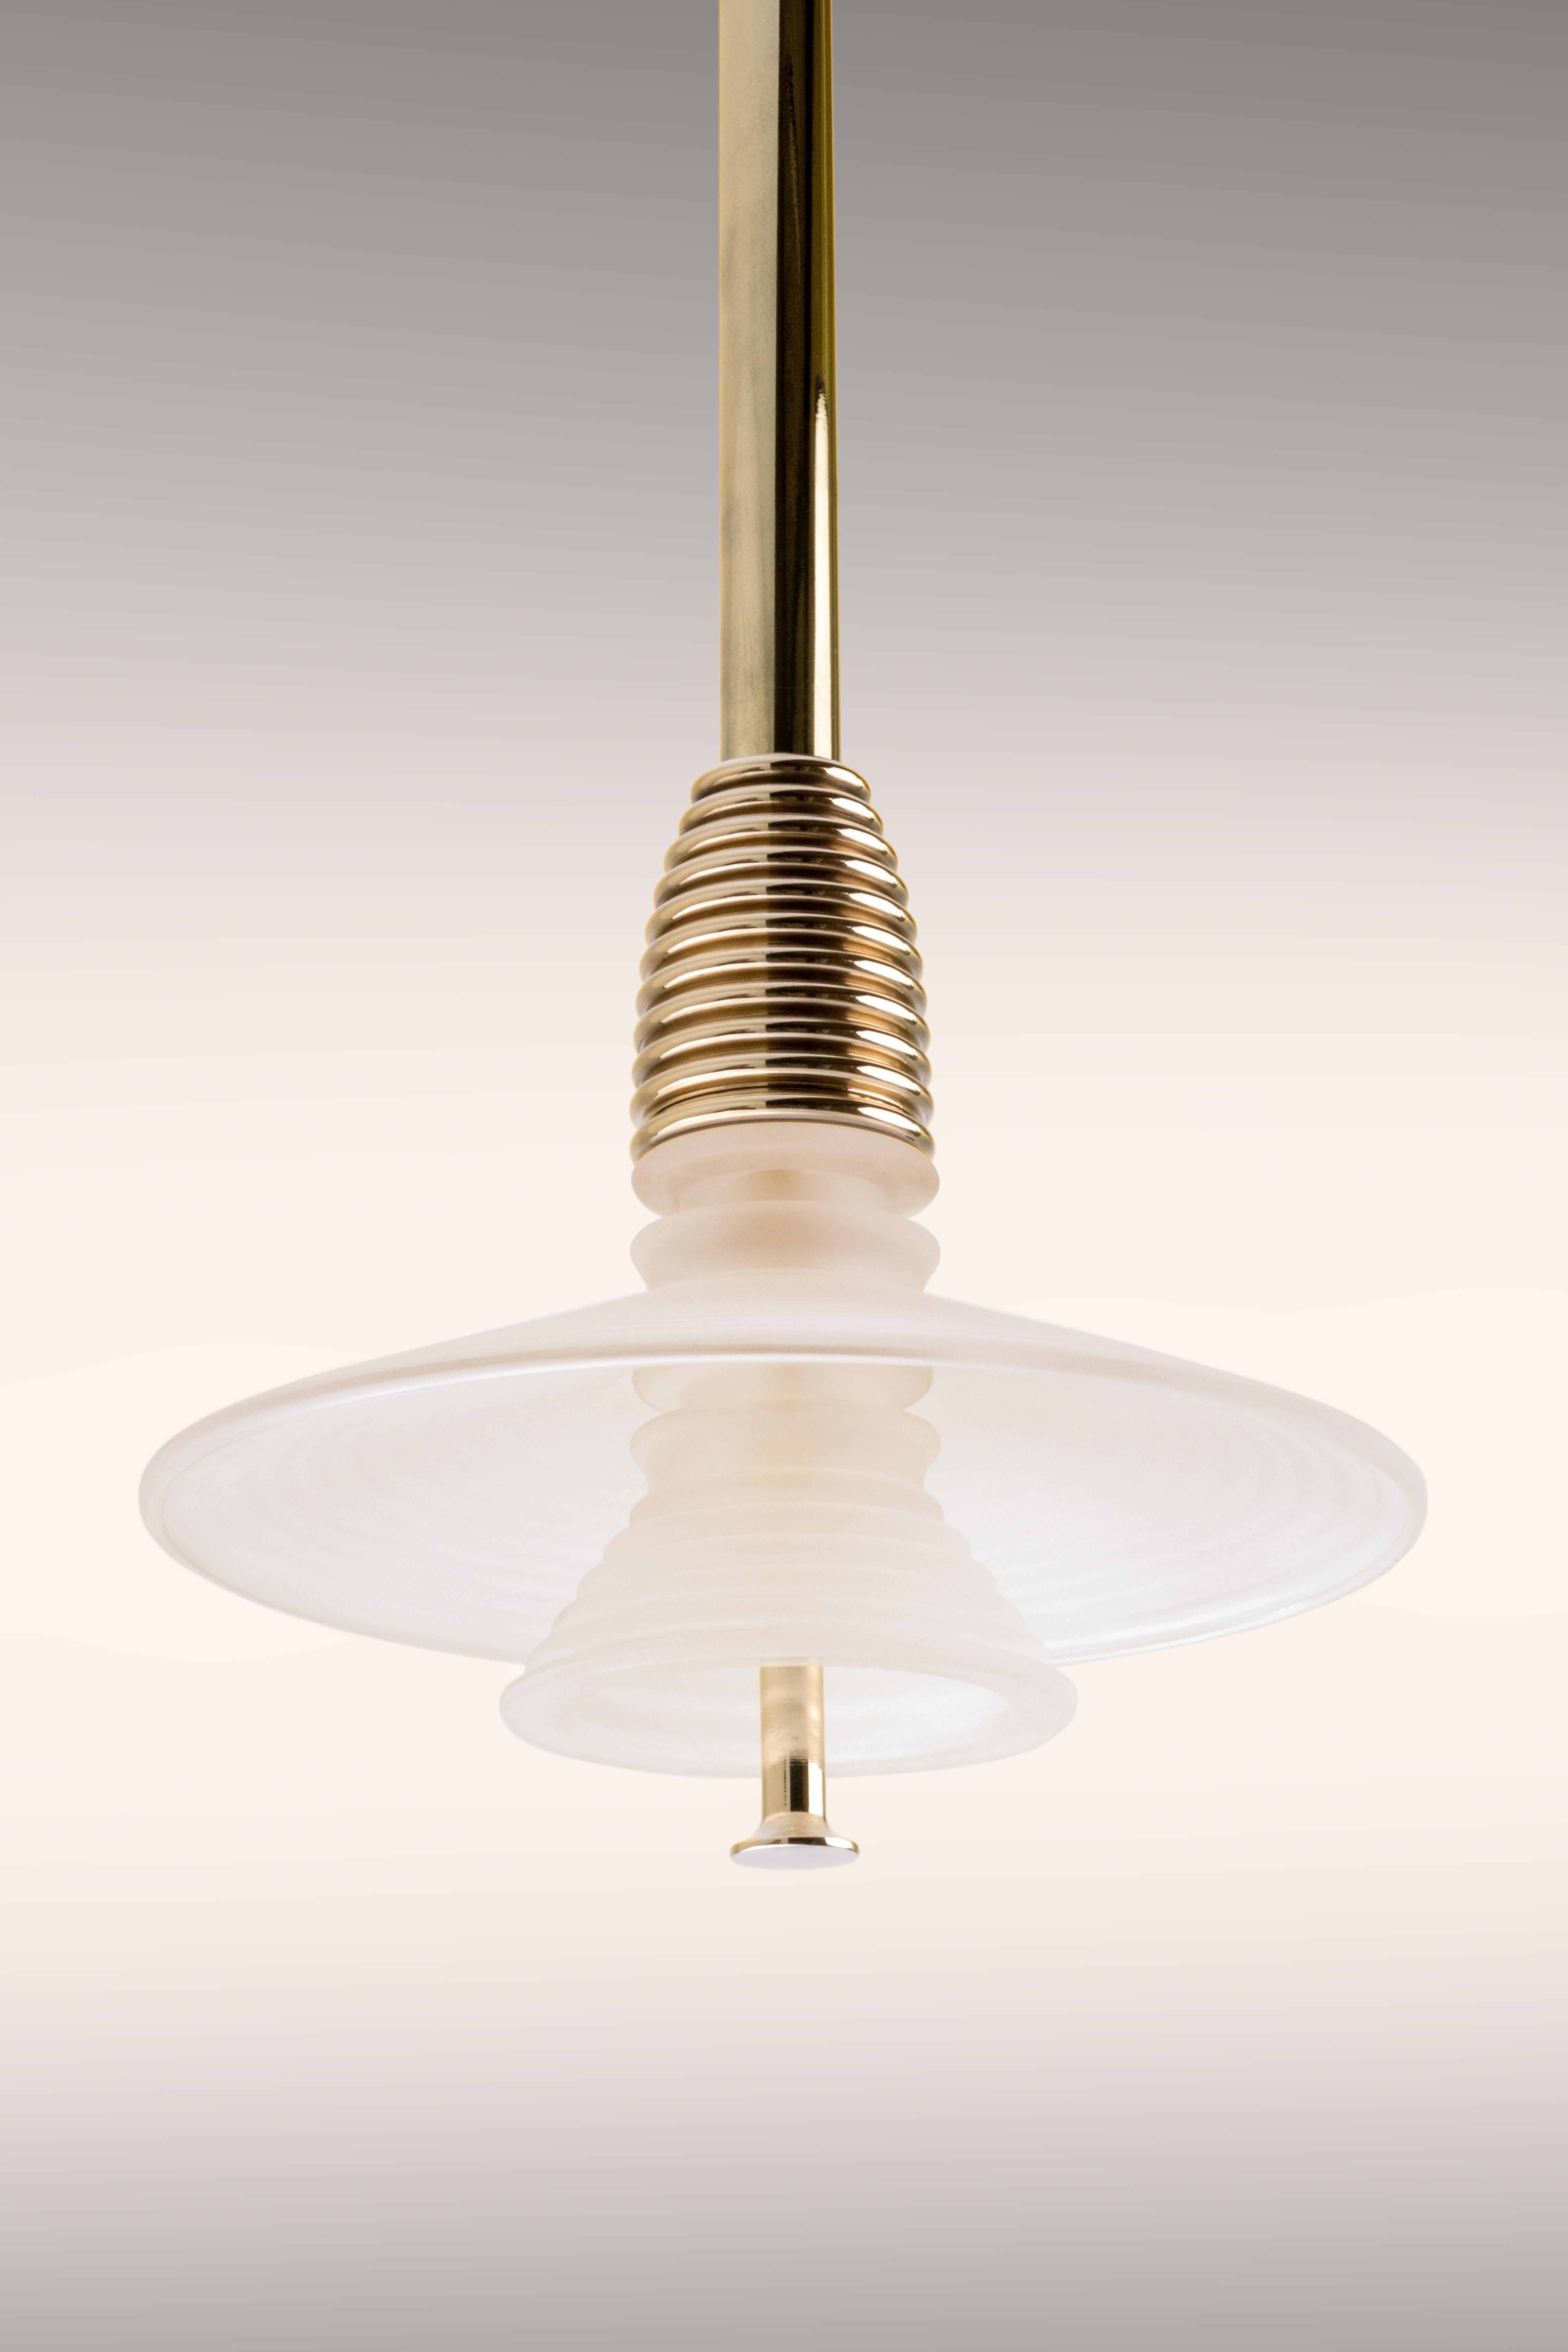 Modern The Insulator 'AB' Pendant in dark brass and frosted glass by NOVOCASTRIAN deco For Sale